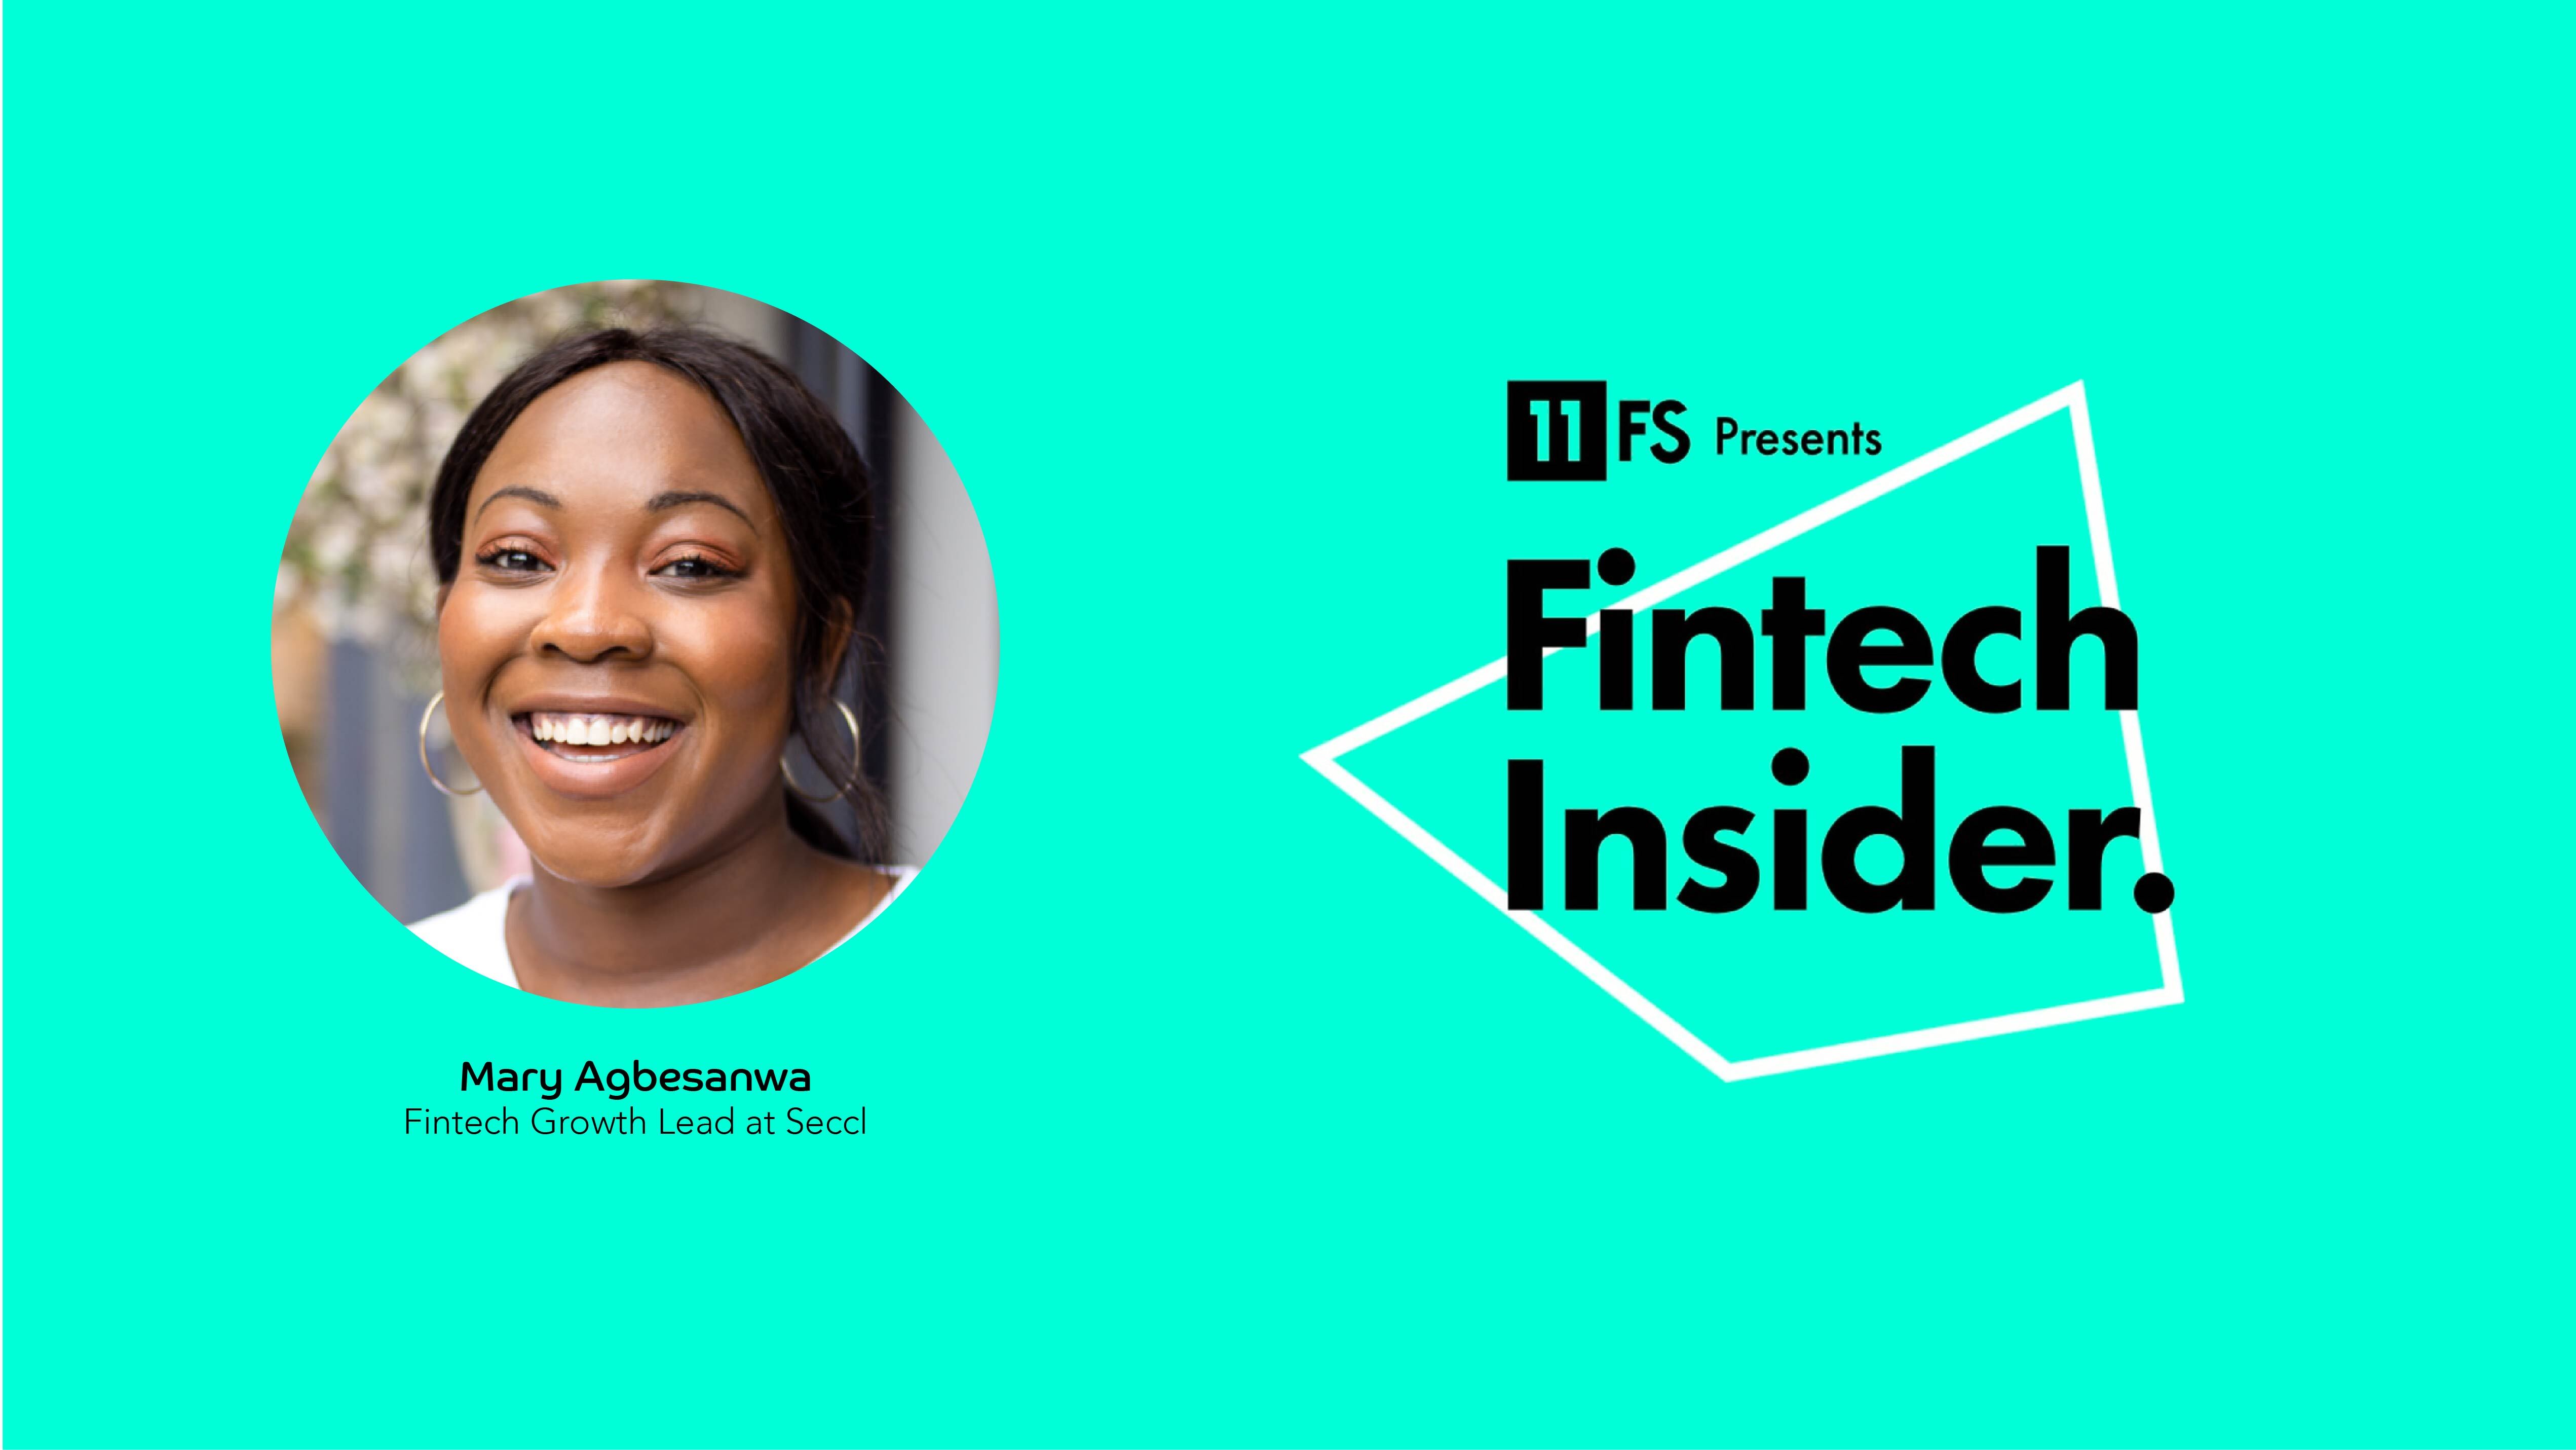 Building successful fintech partnerships: my appearance on the Fintech Insider podcast by 11:FS